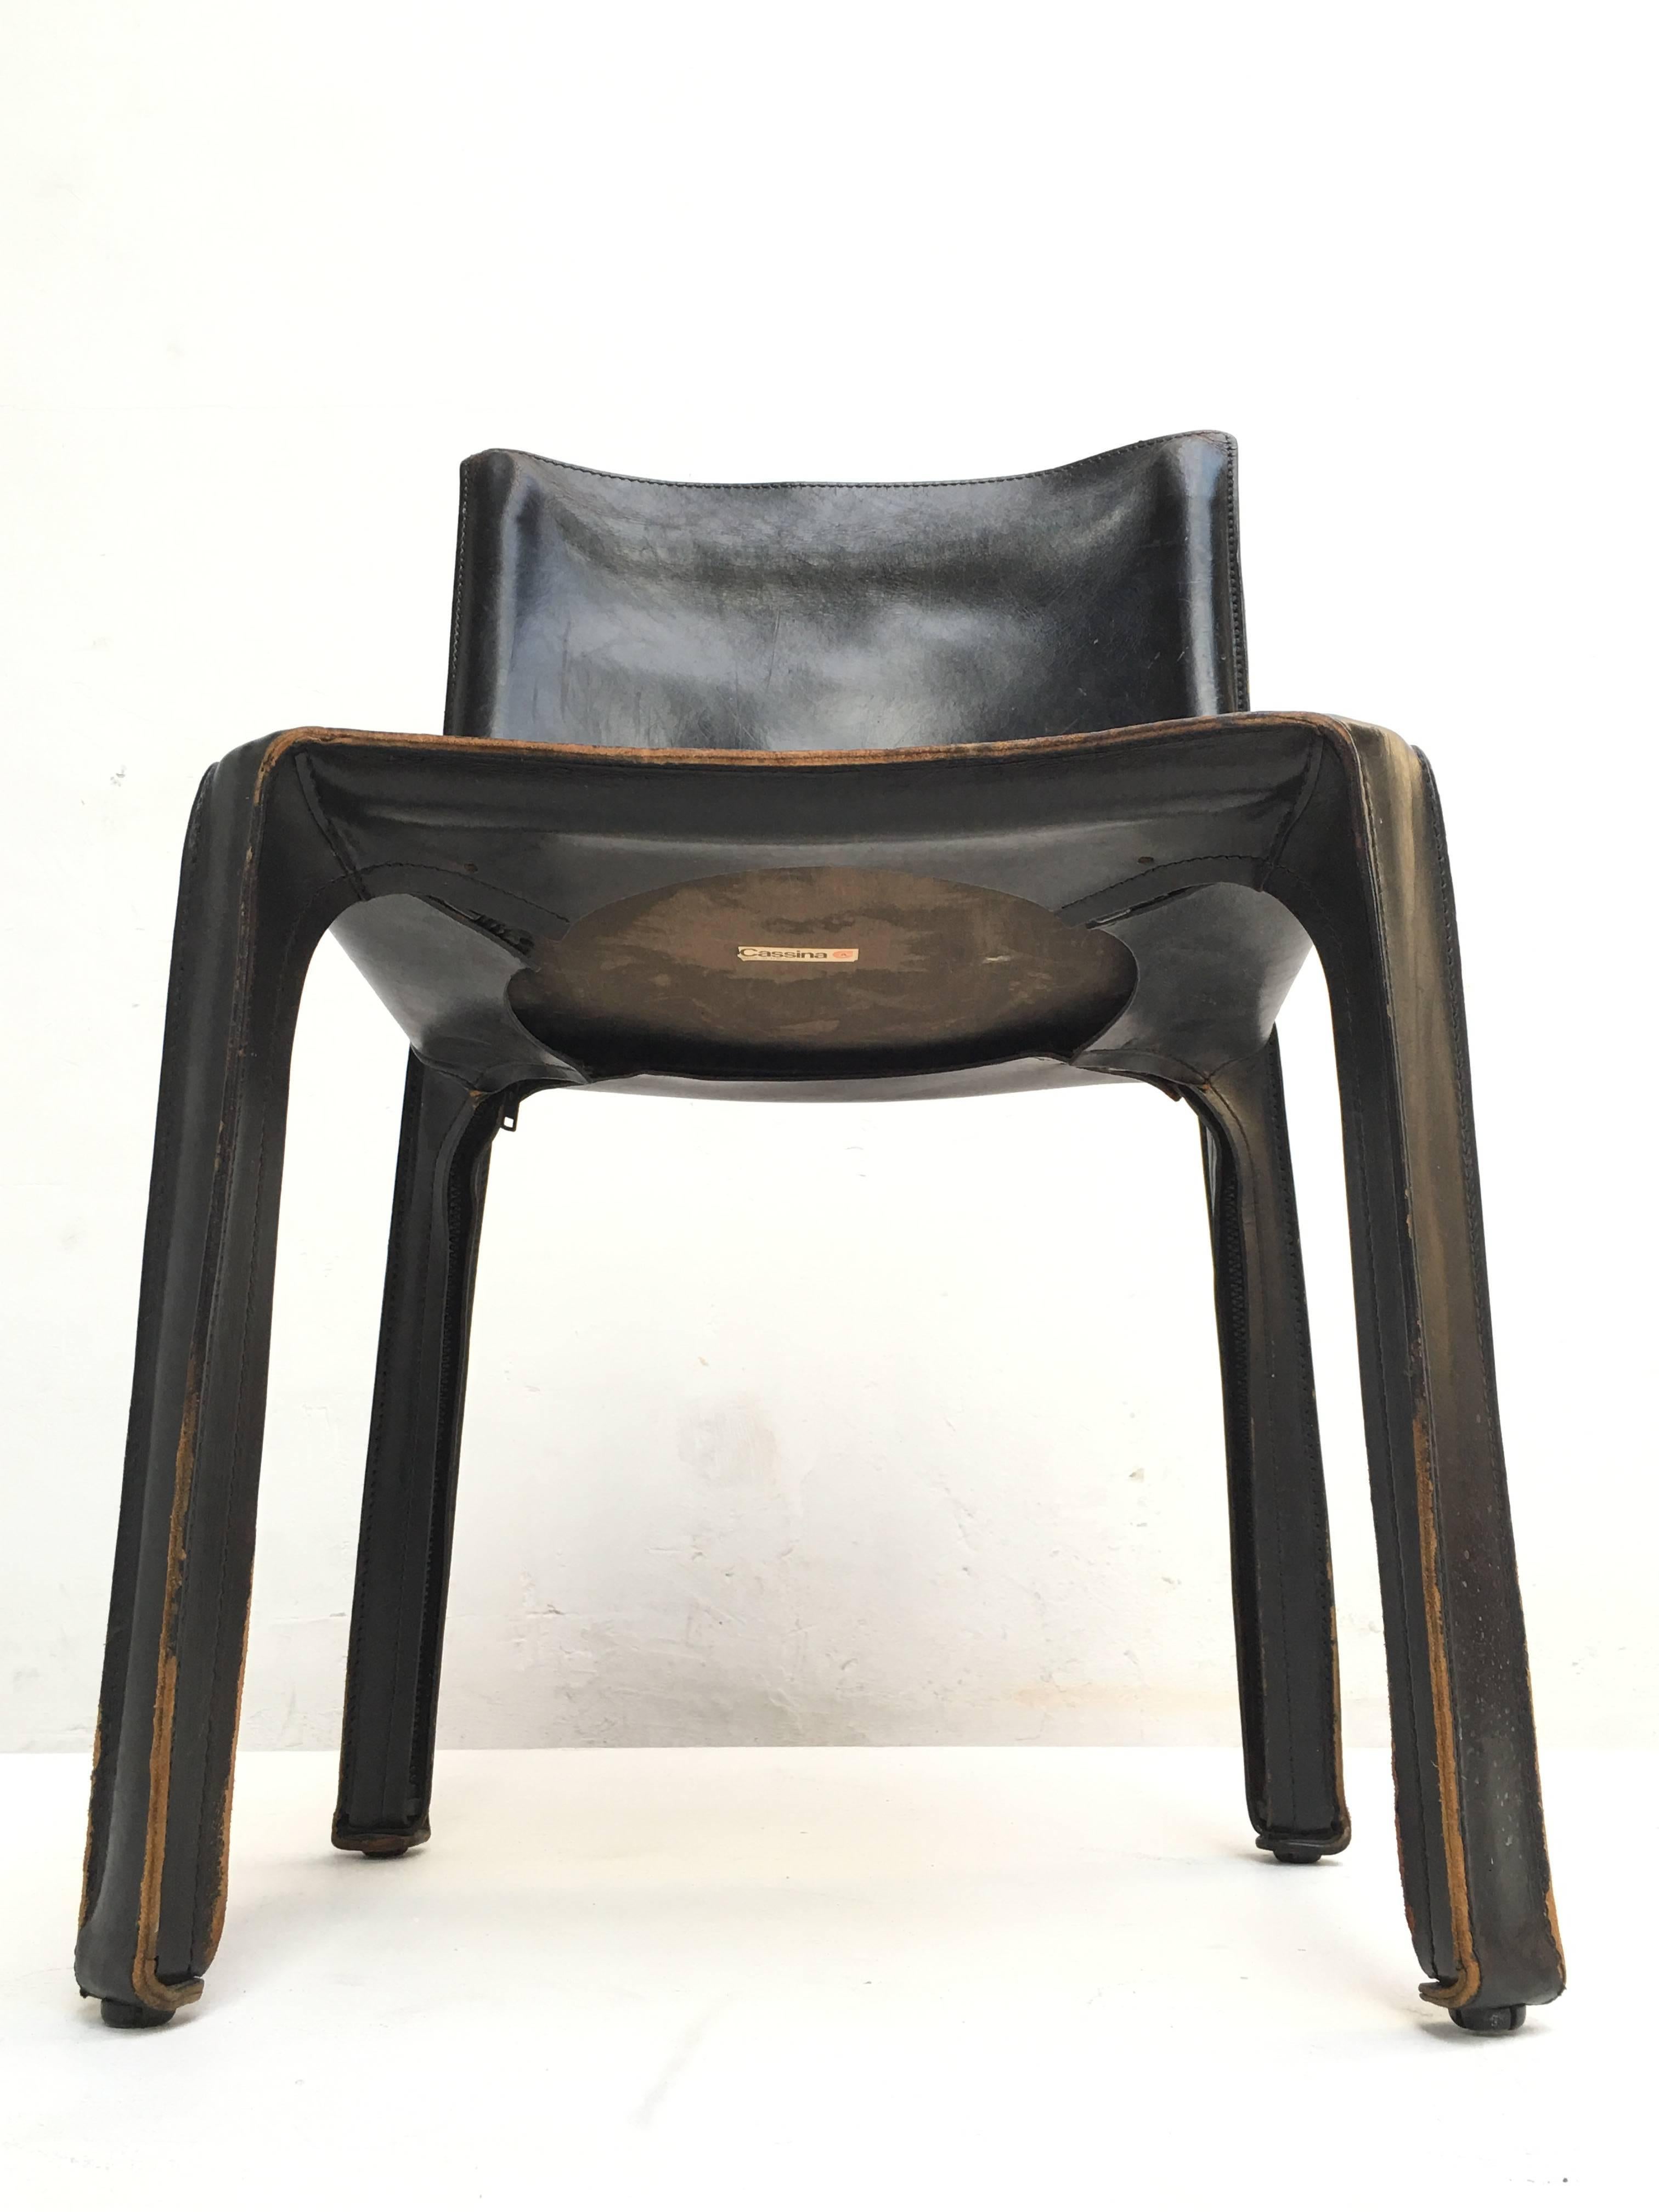 Verry nice set of eight 'CAB' dining chairs designed by Mario Bellini in 1977 finished in black leather over steel frames. The leather is original and has lovely patination. Some of the chairs still retain the original early Cassina labels located